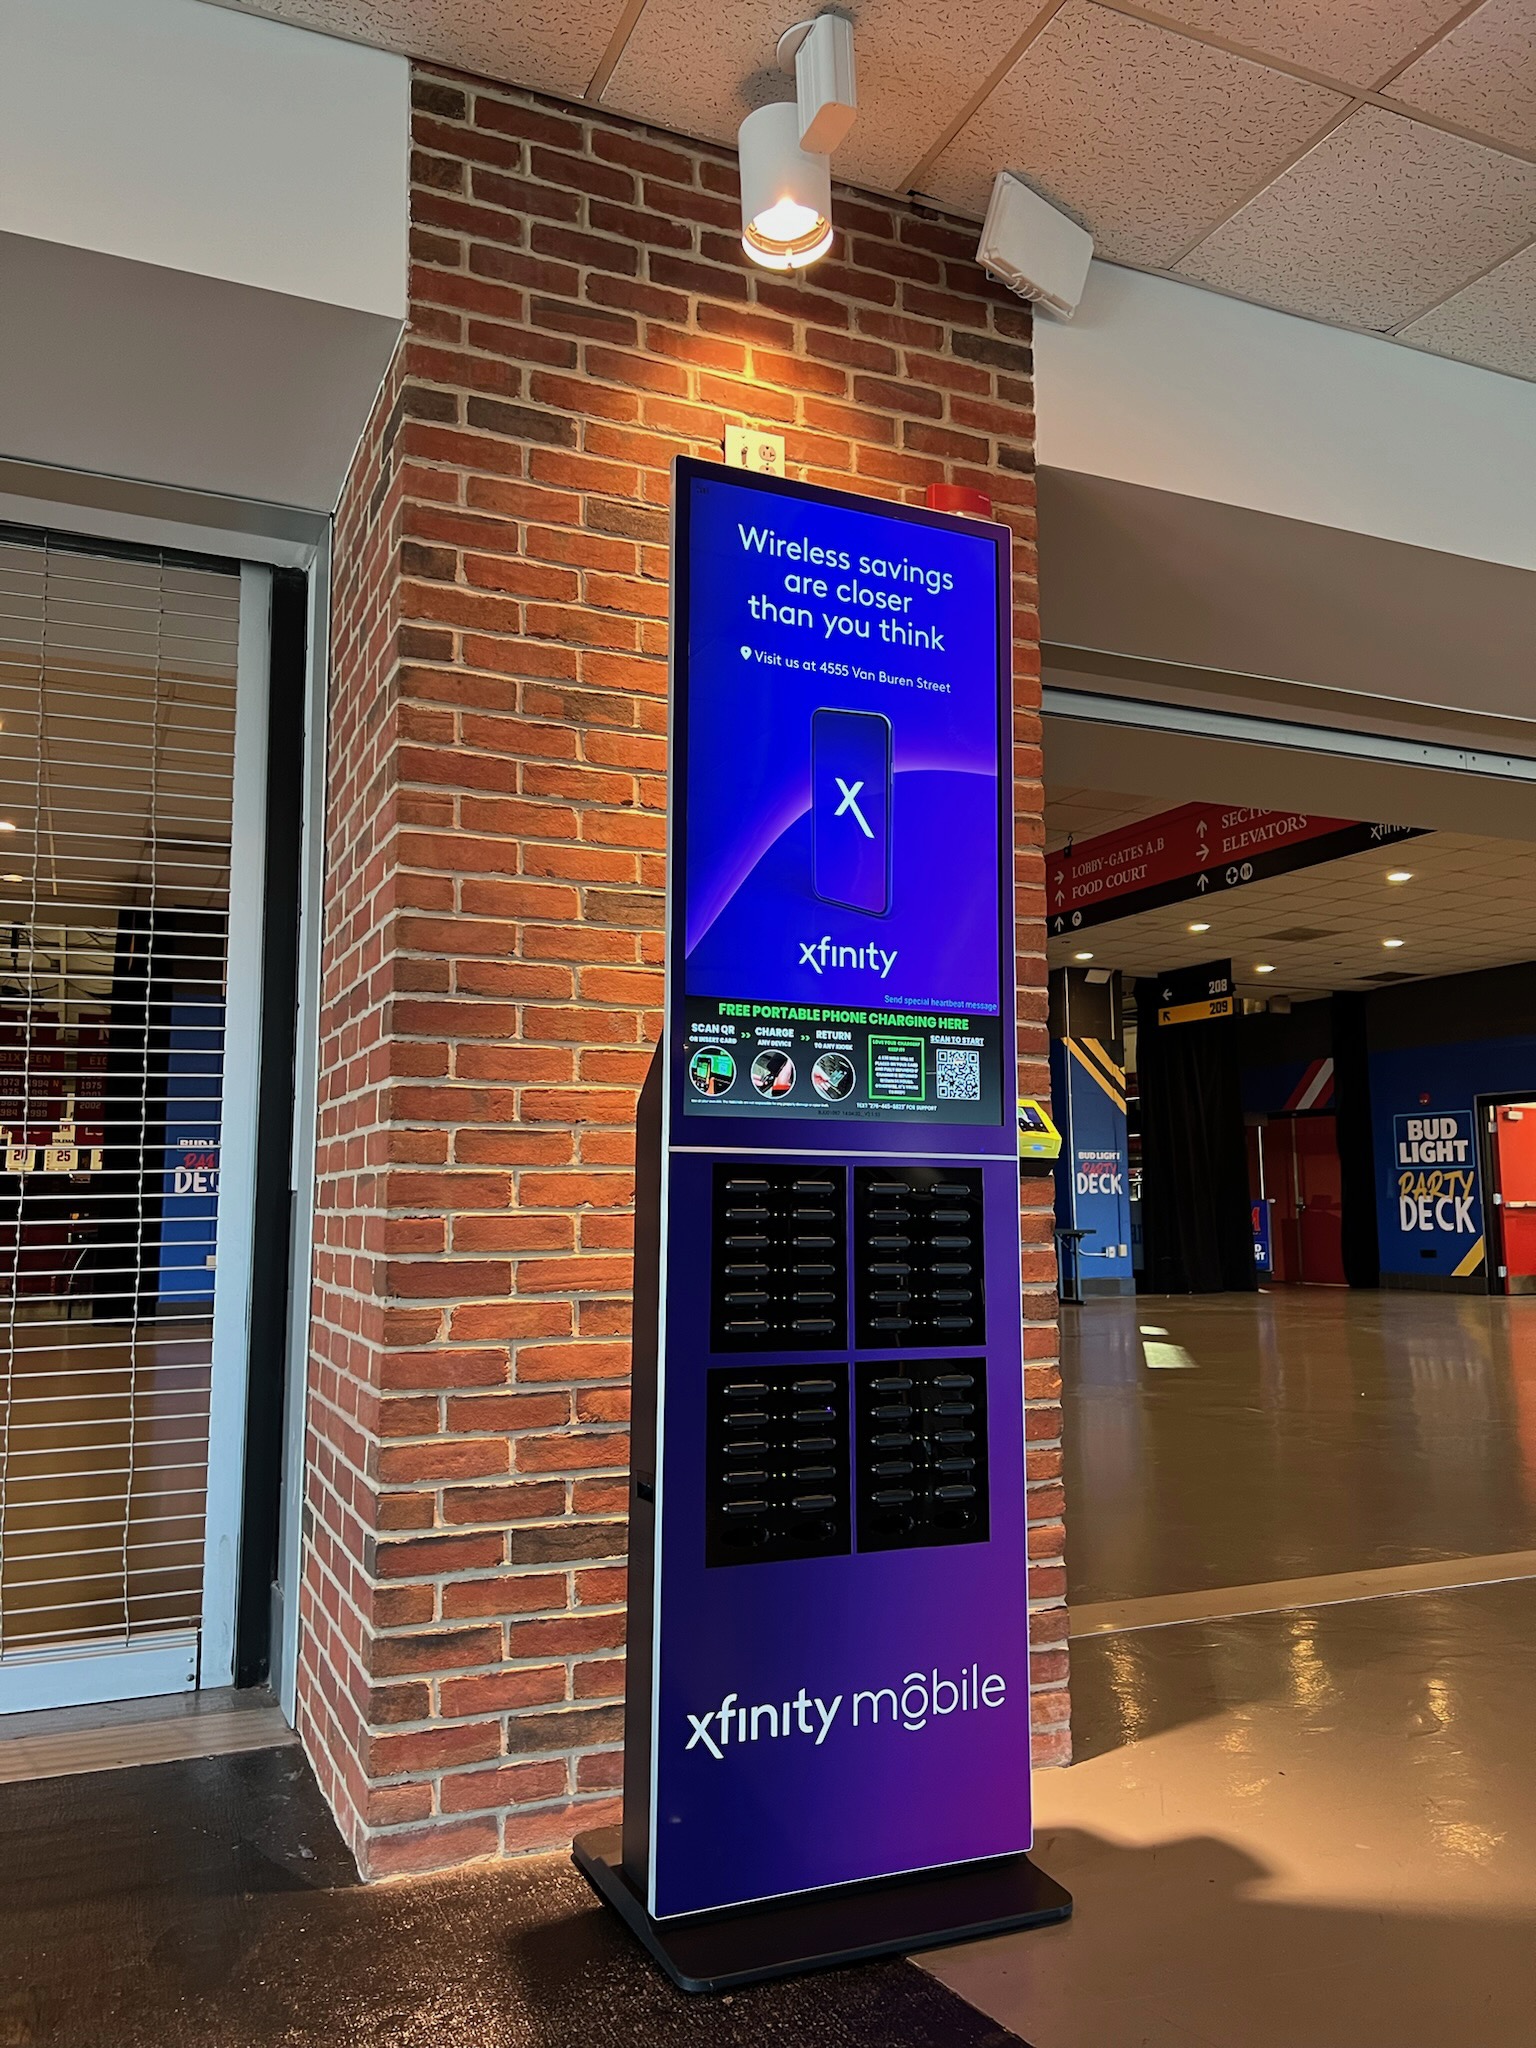 JUUCE Portable Charger Rental Kiosks For Sponsors with Xfinity Mobile